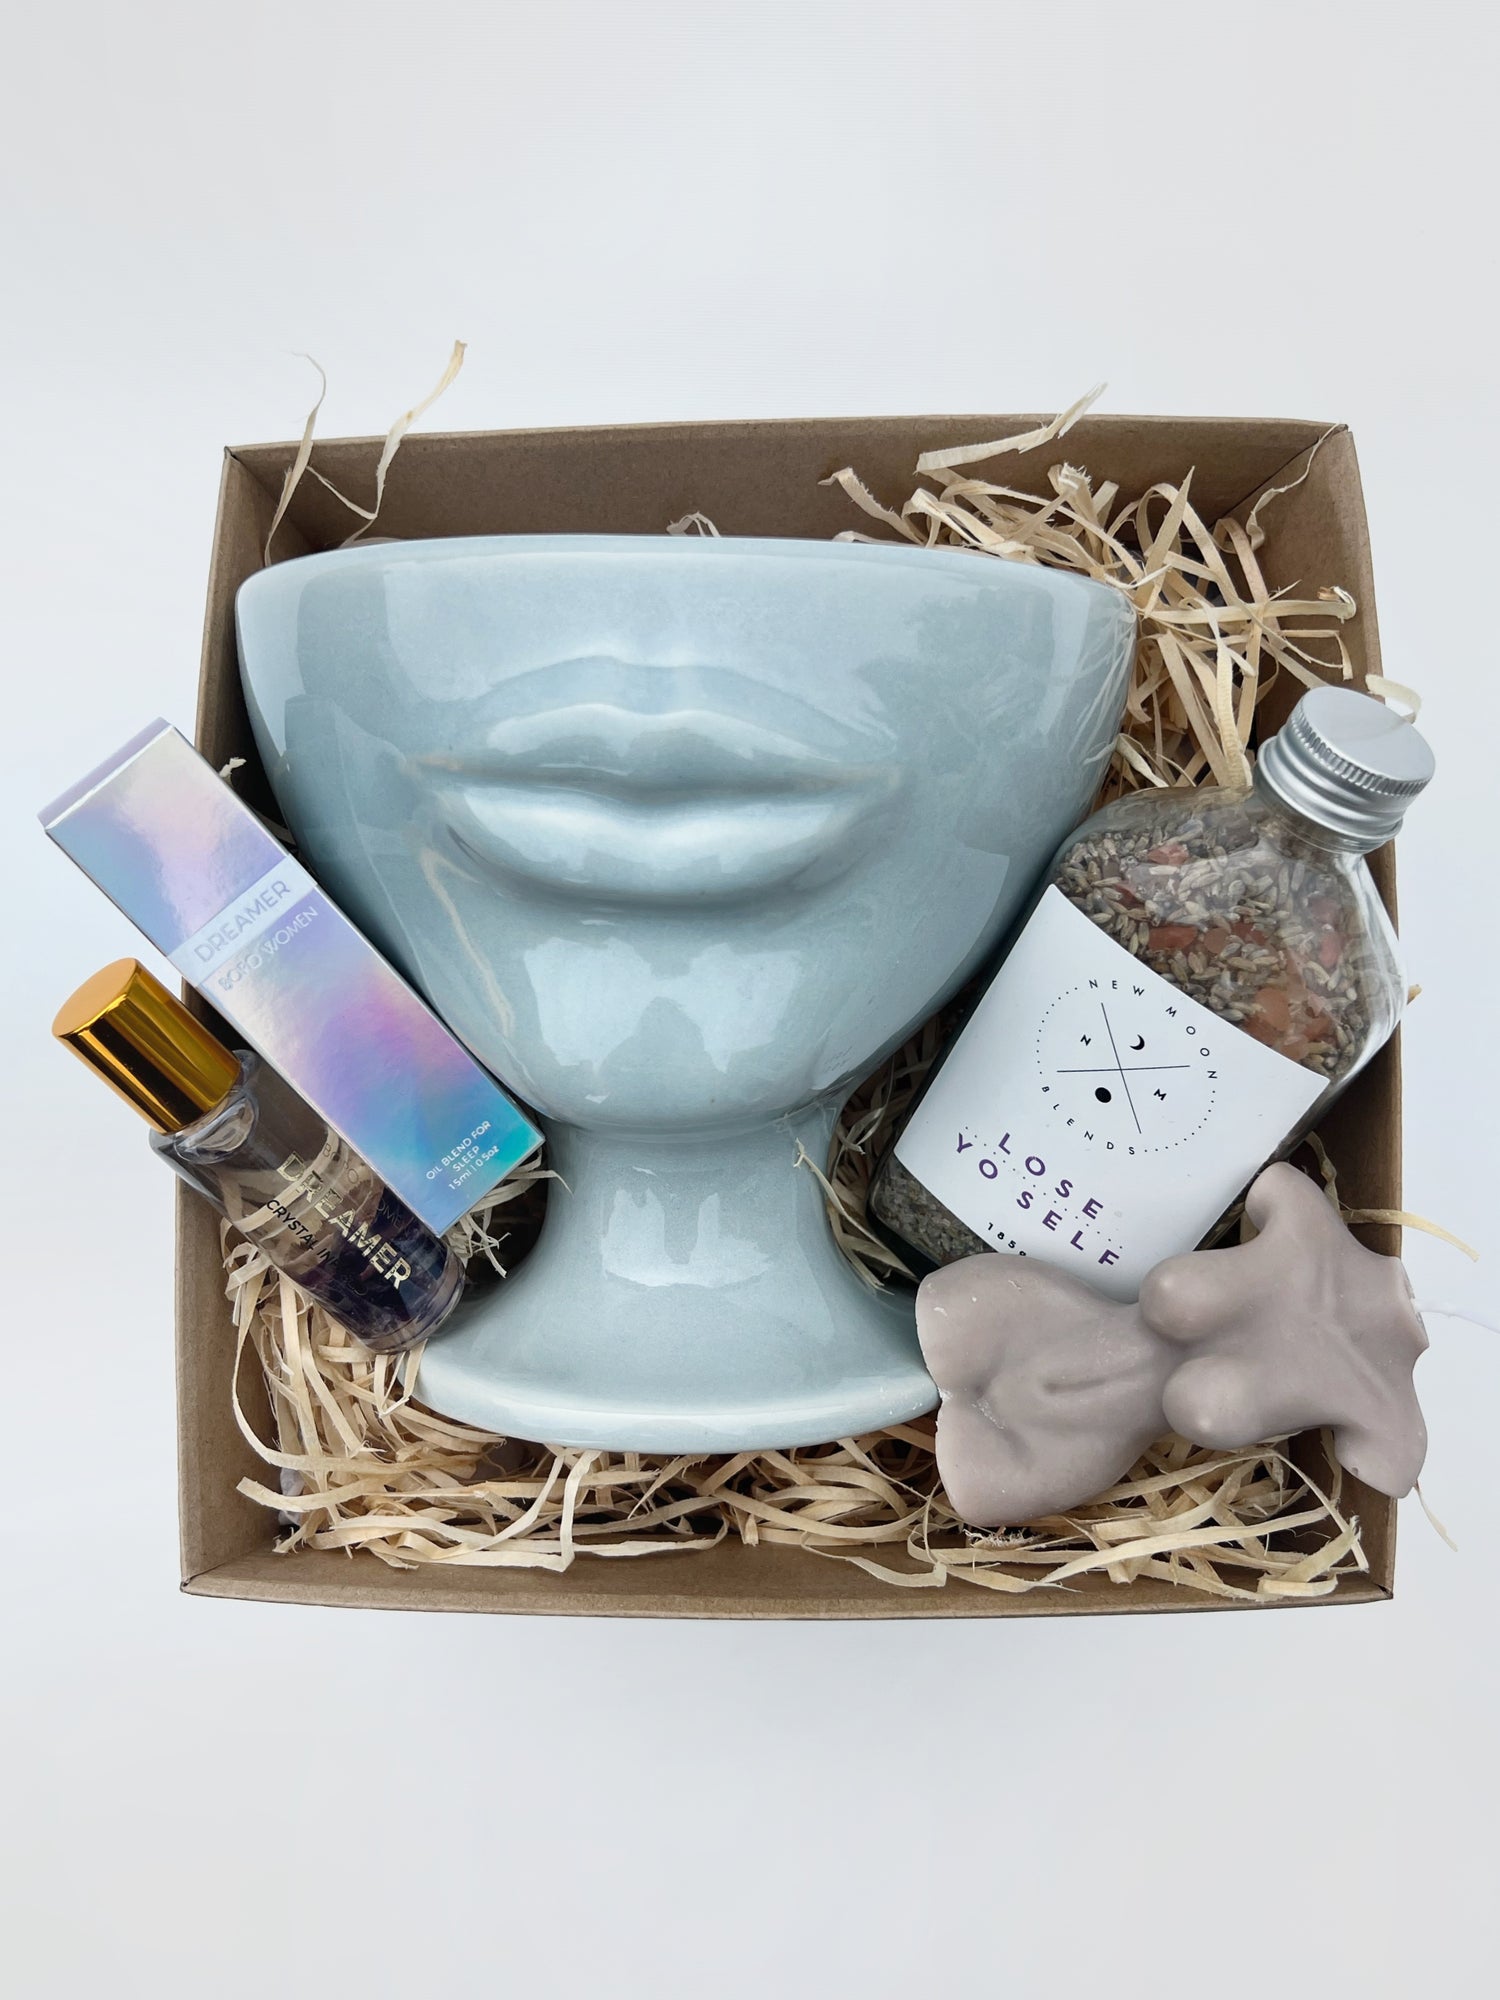 A fun and playful homeware, bath & body gift box. Including pale blue handmade ceramic lip vase, bath soaks, crystal perfume roller & lady soy wax candle. Gift wrapped and presented in our signature wrapping & branding.